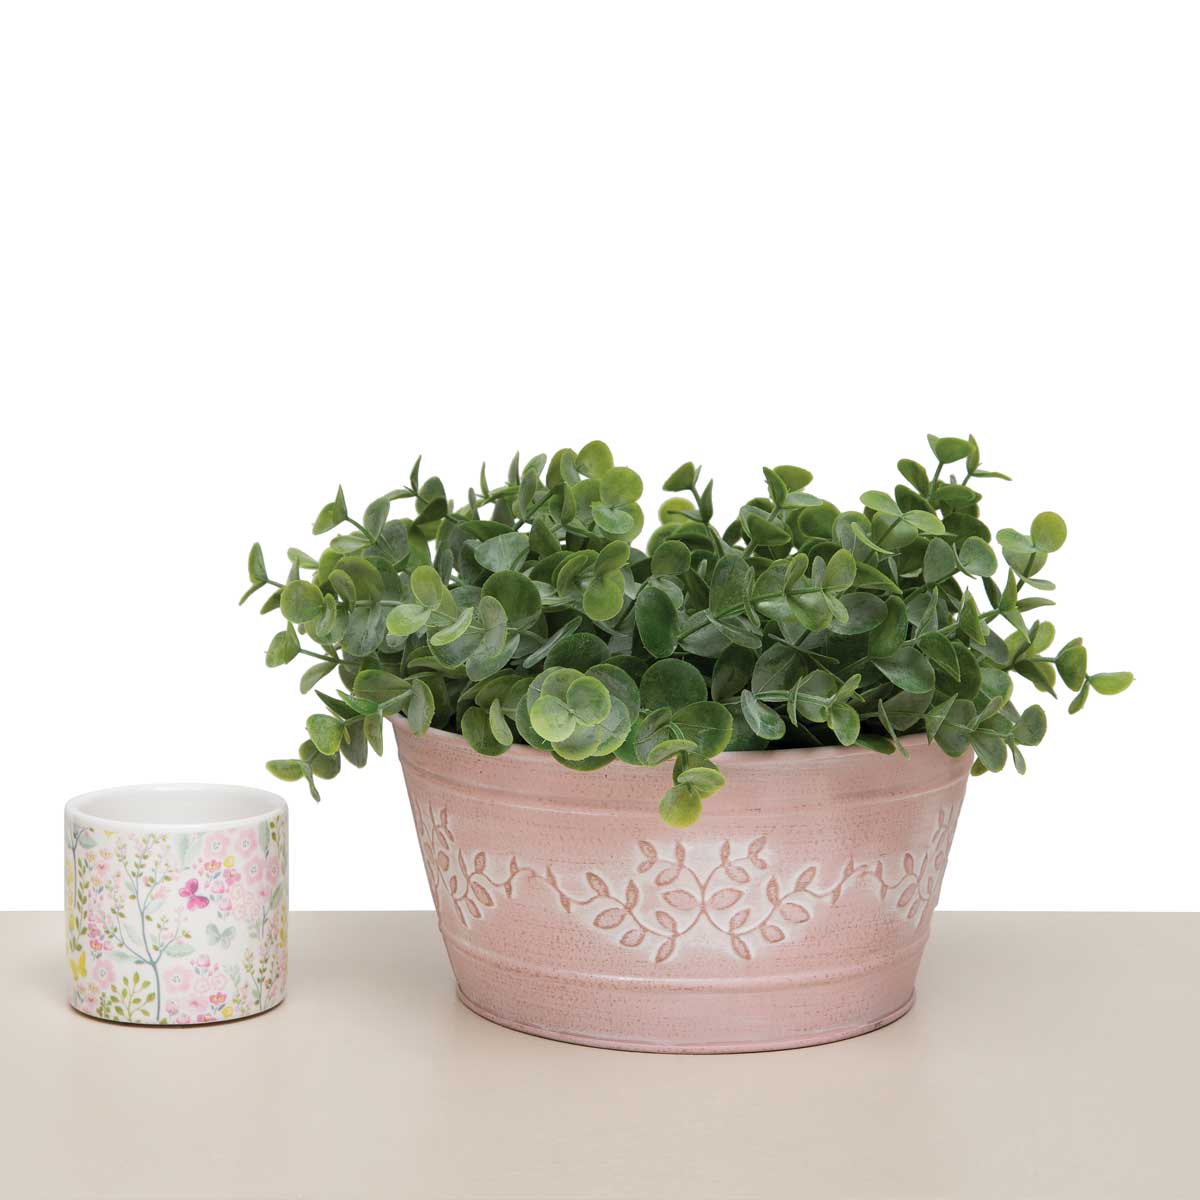 BUCKET PRIVET PINK BOWL 7.25IN X 3.5IN METAL - Click Image to Close